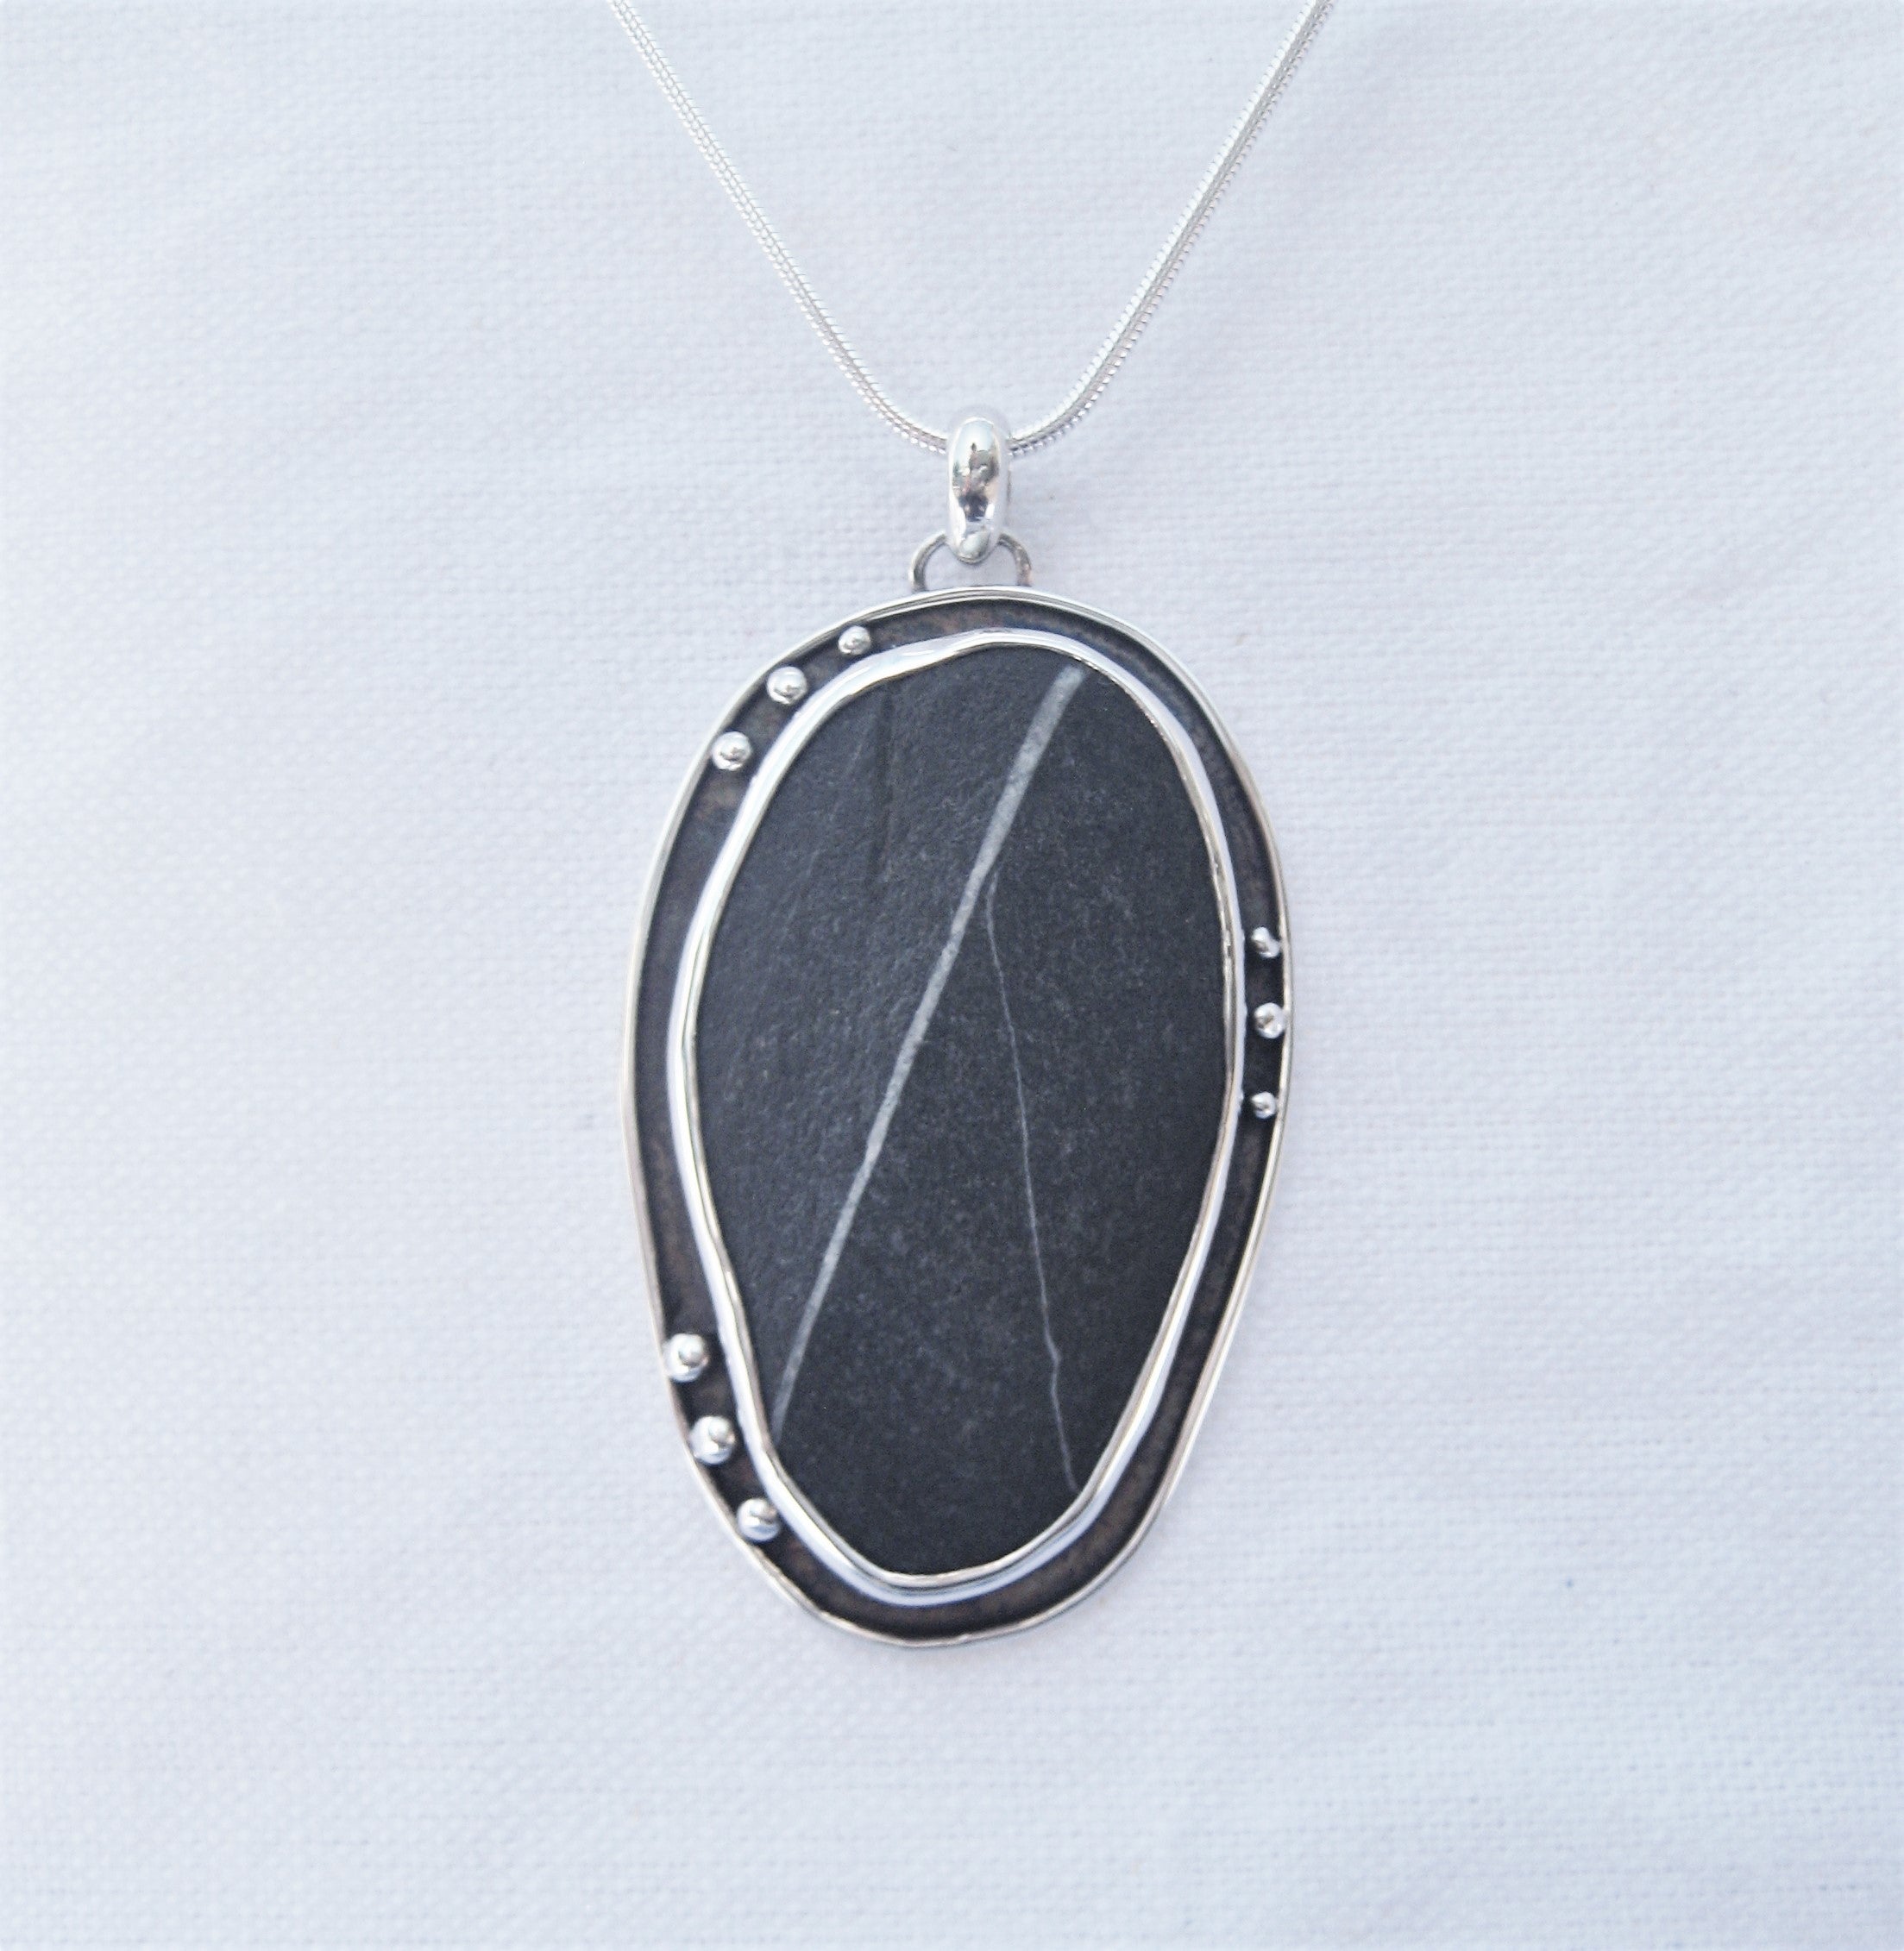 Pebble with detail Pendant